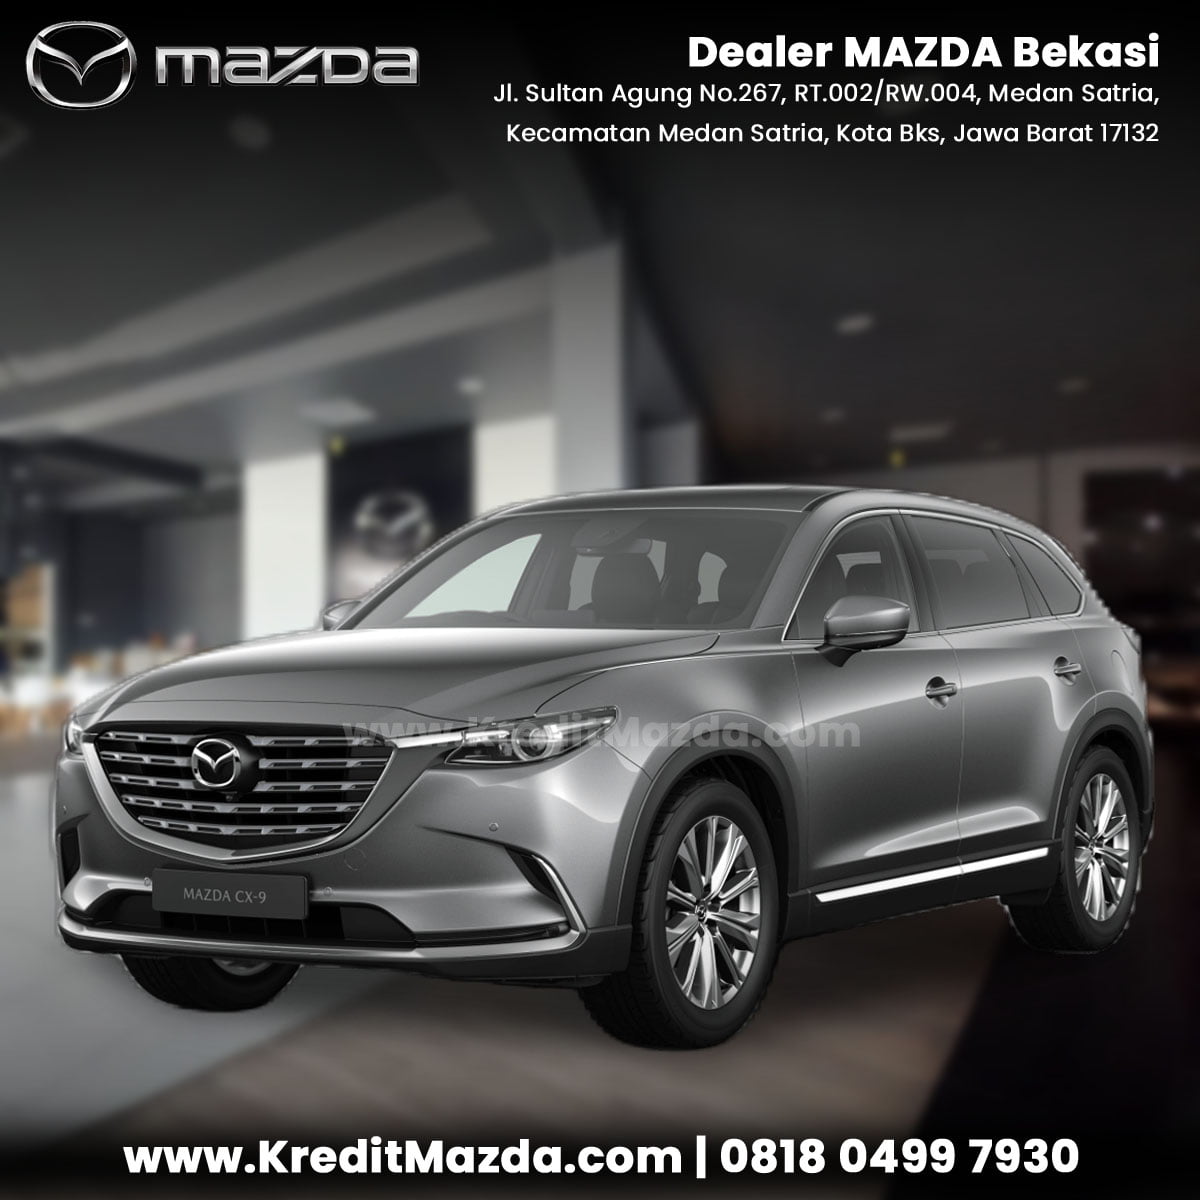 all new mazda cx-9 large suv homepage